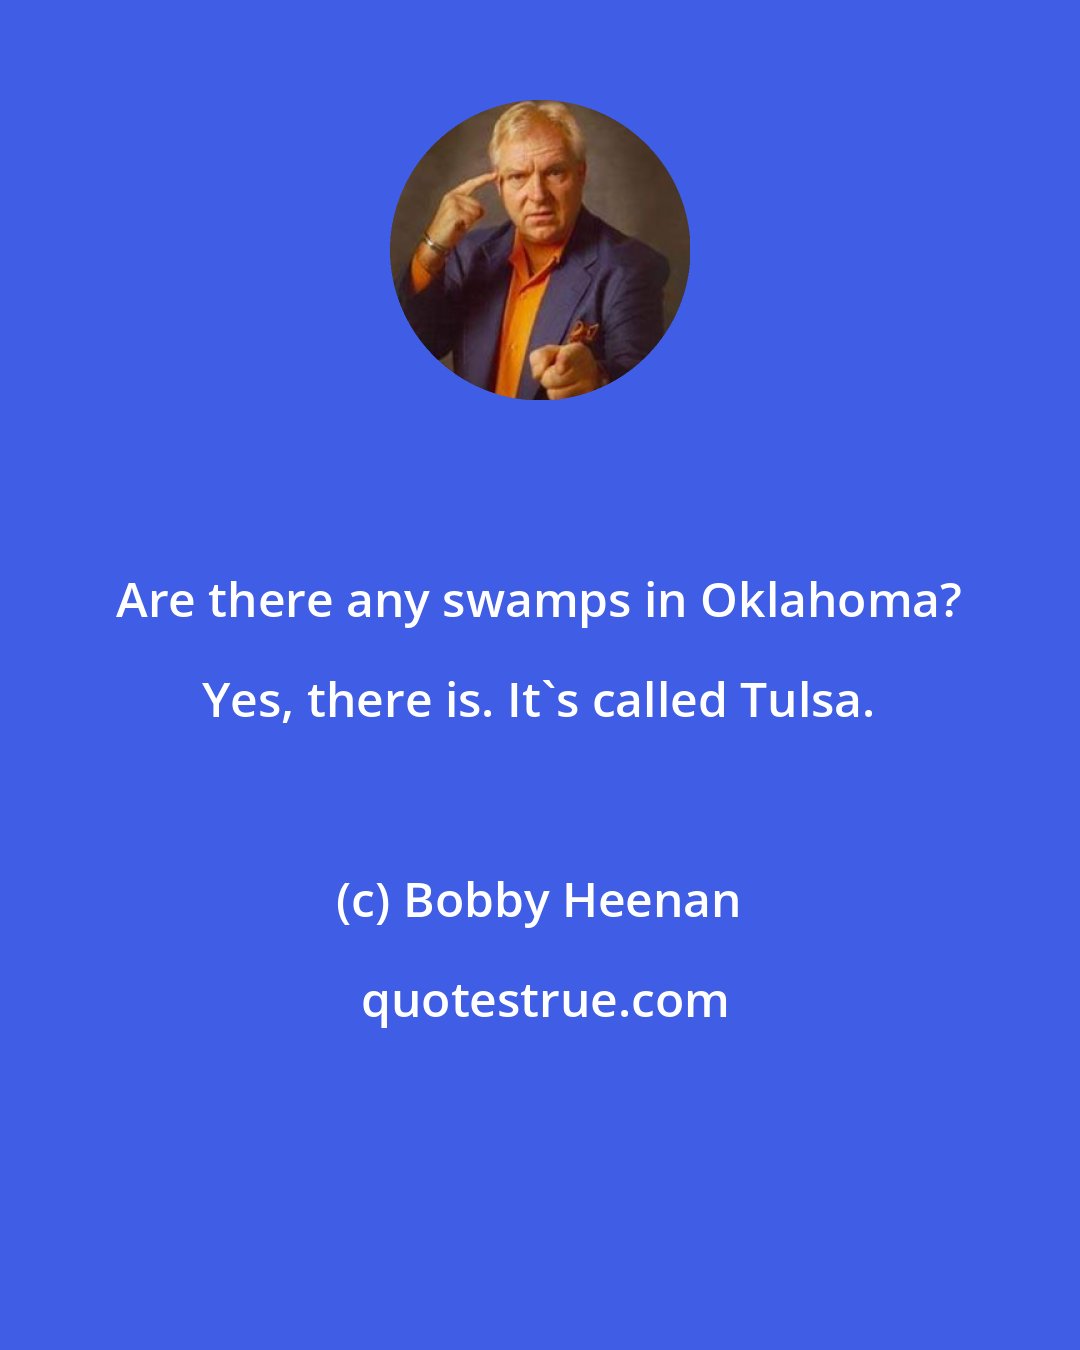 Bobby Heenan: Are there any swamps in Oklahoma? Yes, there is. It's called Tulsa.